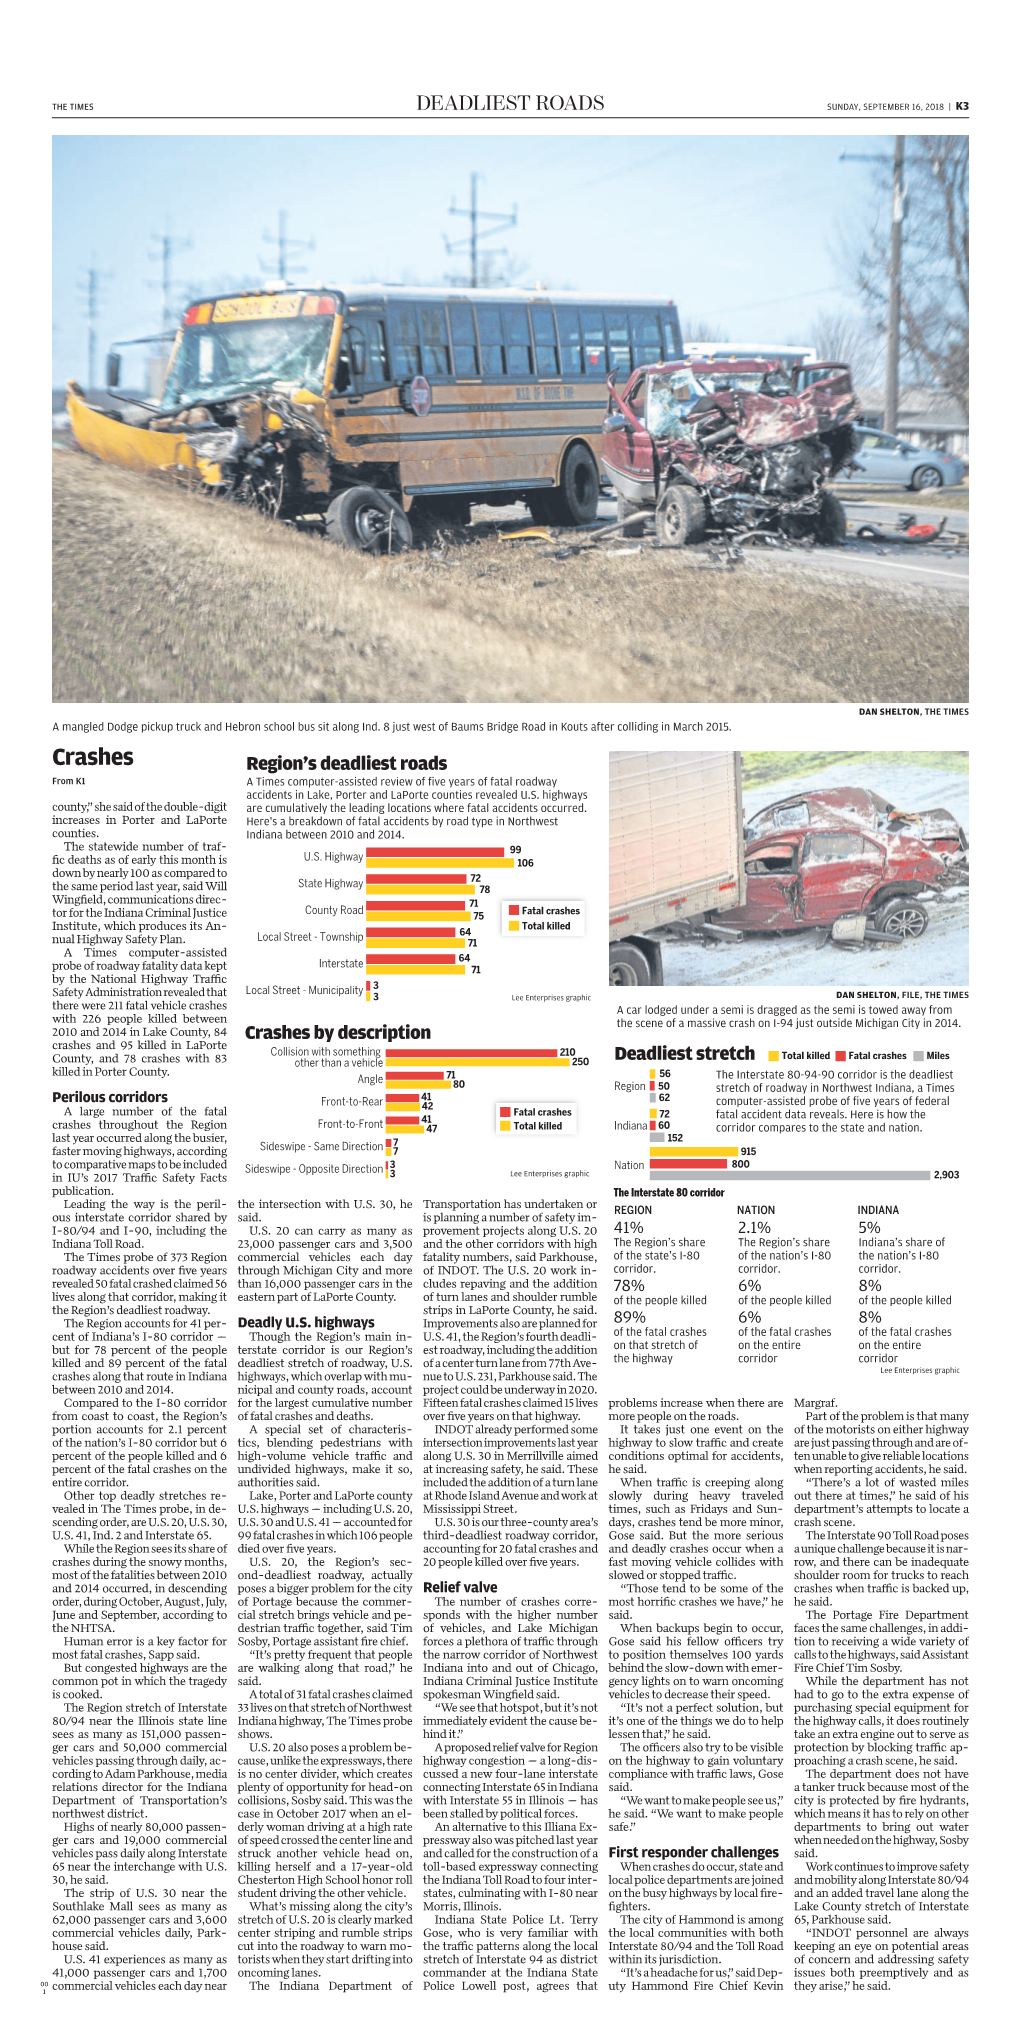 Crashes Region’S Deadliest Roads from K1 a Times Computer-Assisted Review of ﬁve Years of Fatal Roadway Accidents in Lake, Porter and Laporte Counties Revealed U.S